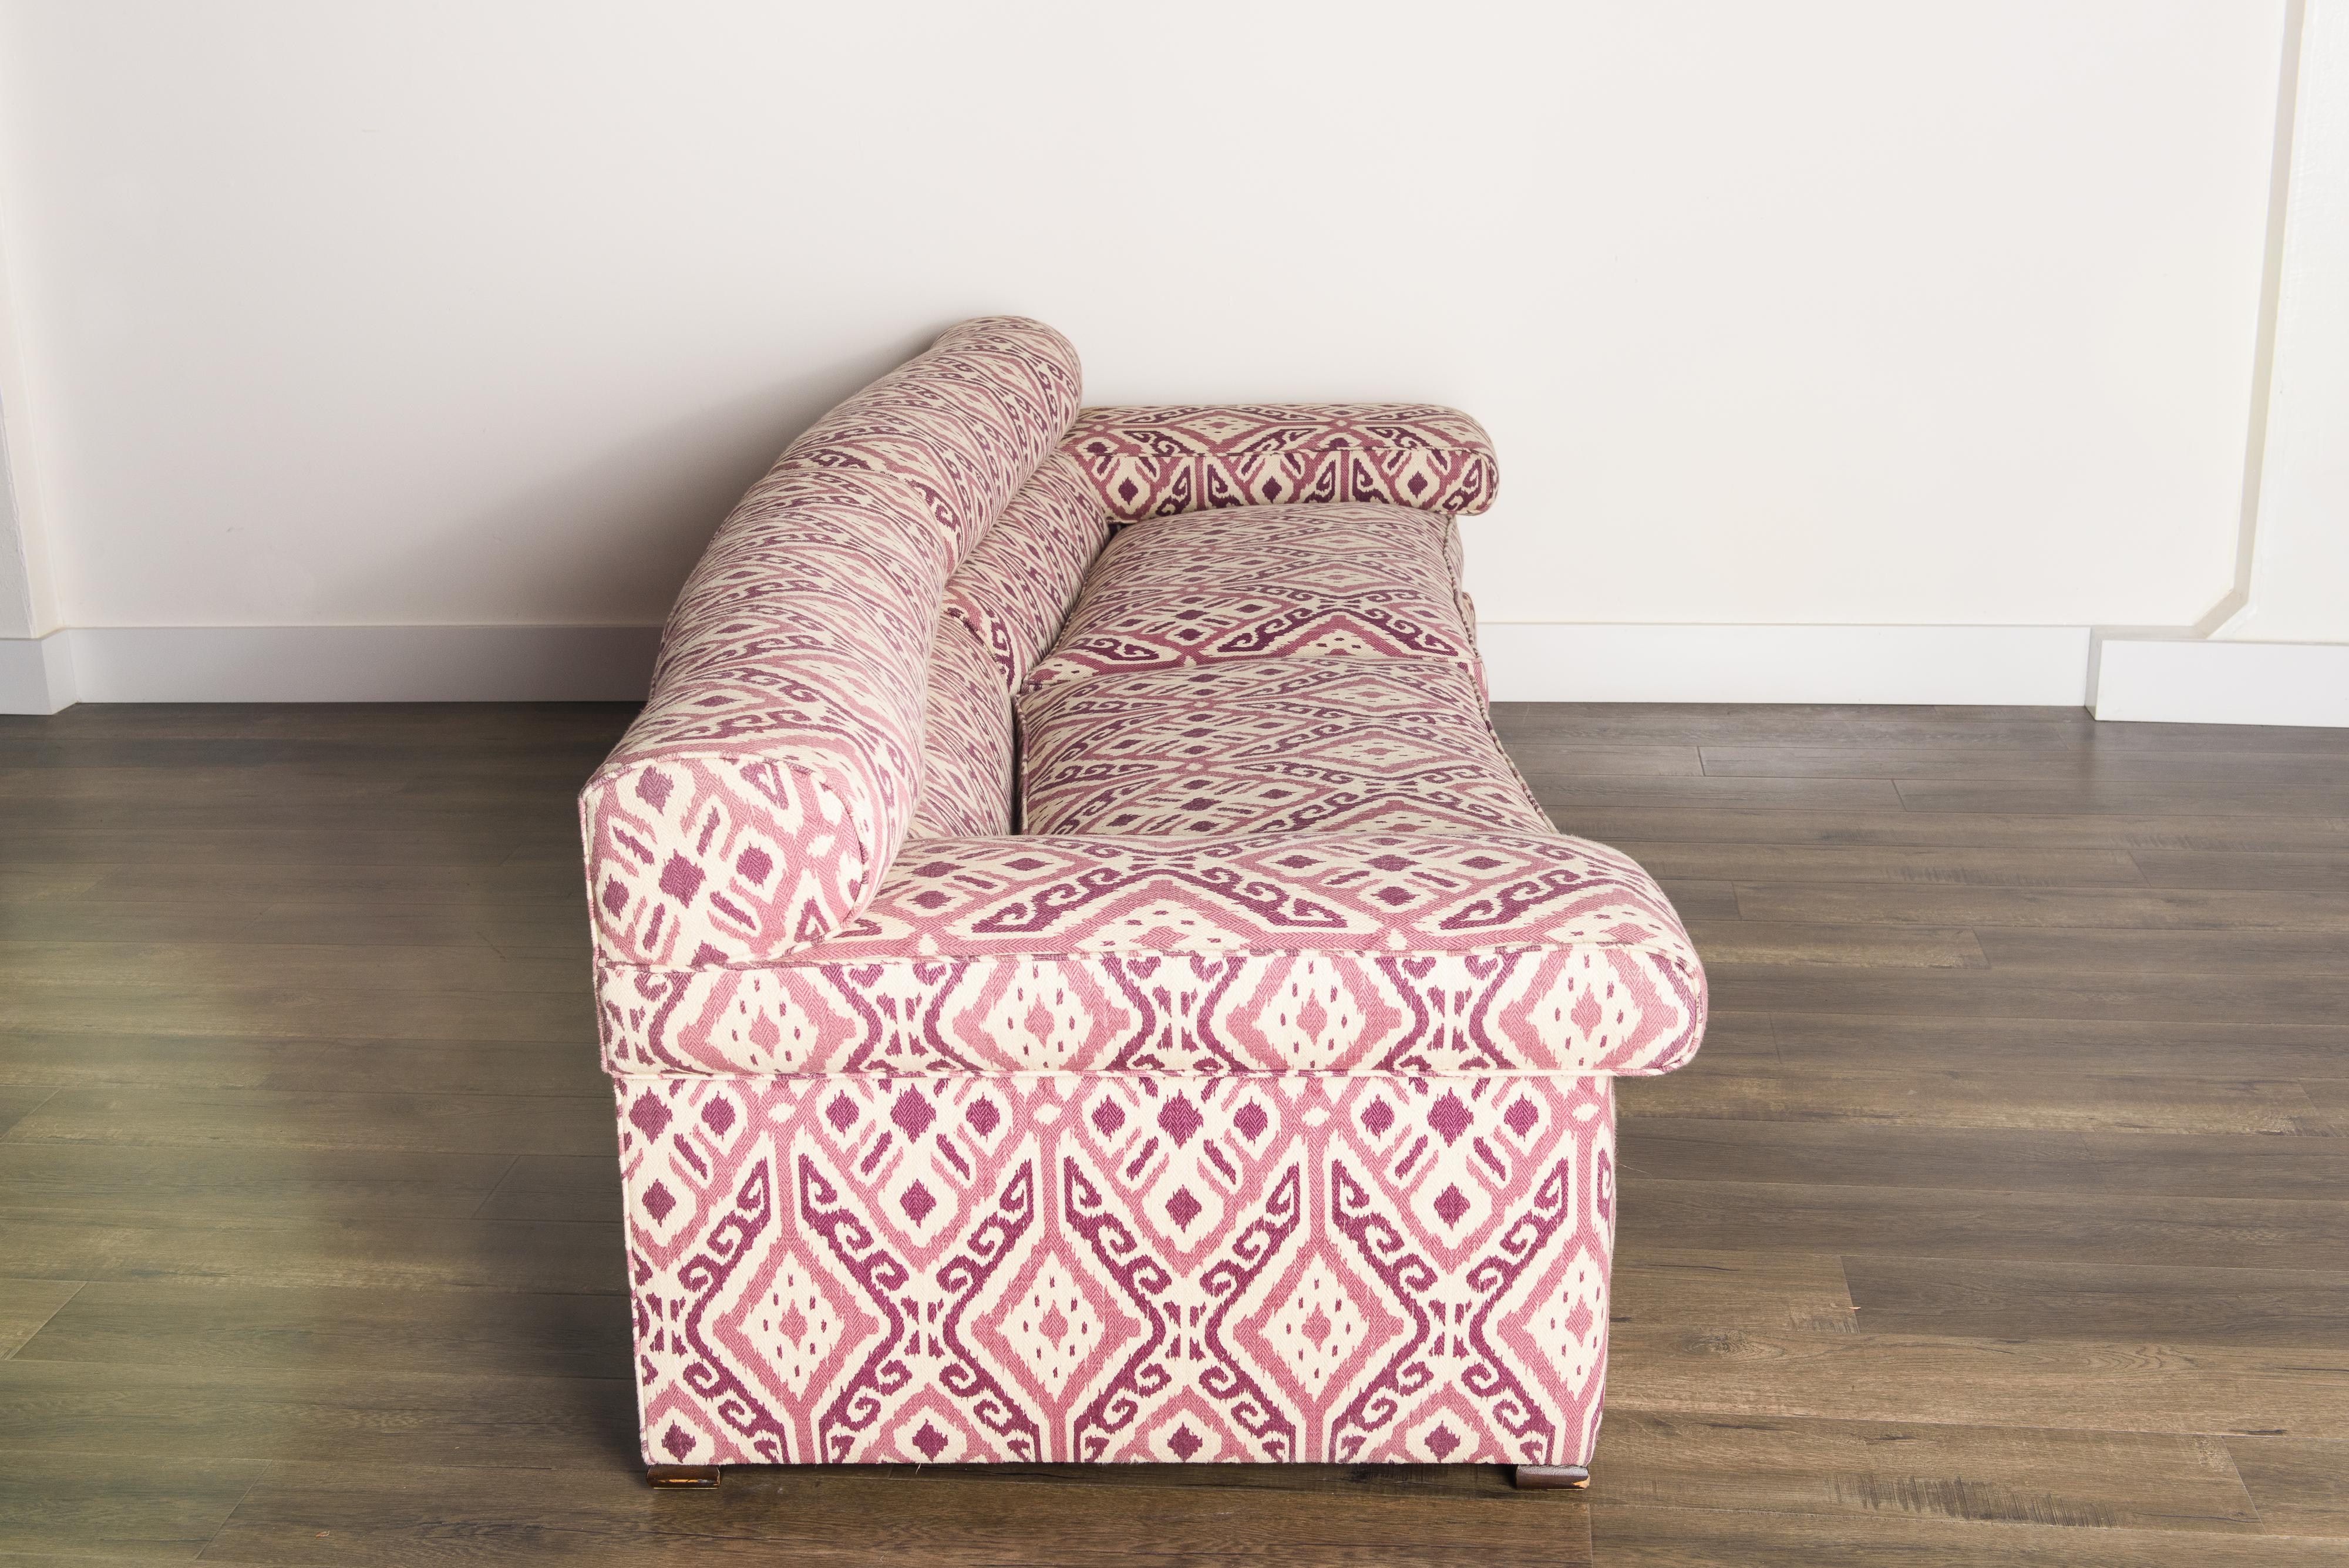 Mid-20th Century Paul Laszlo Attributed Curved Sectional Sofa Reupholstered in Pink Ikat Fabric For Sale